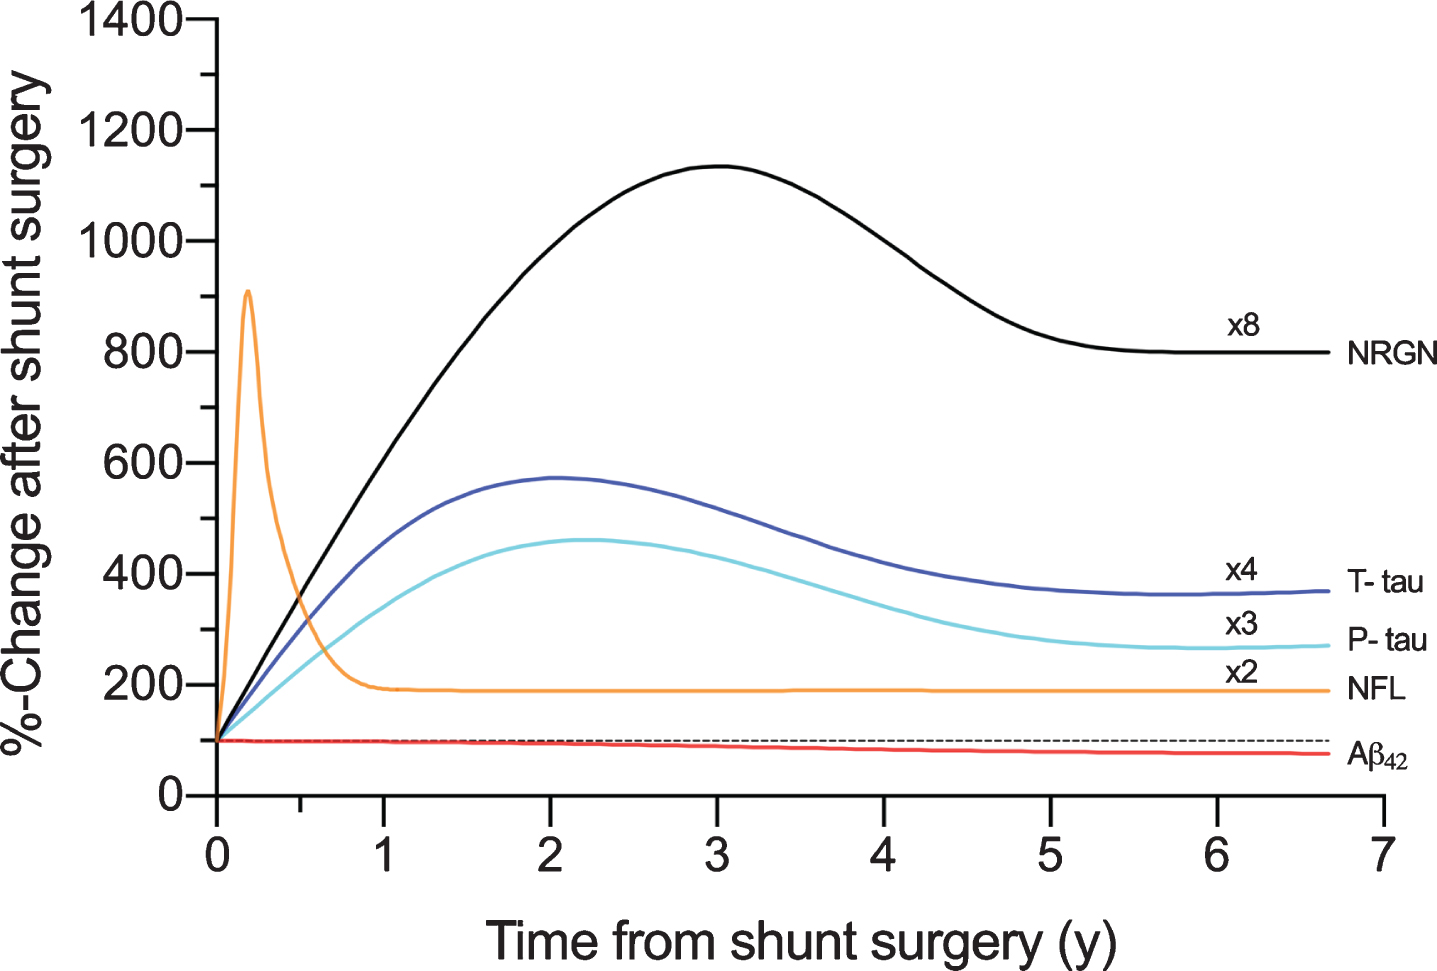 The schematic presentation of the temporal dynamics in biomarkers of neurodegeneration plotted with the time in years (y) from shunt surgery and percentual change from the pre-surgery values (100%). The plots are formed with local polynomial regression and based on the data shown in Supplementary Figure 1A-E. Multipliers added to figure, are highlighting the longitudinal elevation found for biomarkers. Aβ42, Amyloid-β 42; T-tau, total tau; P-tau, tau phosphorylated at threonine 181; NFL, neurofilament light; NRGN, neurogranin.